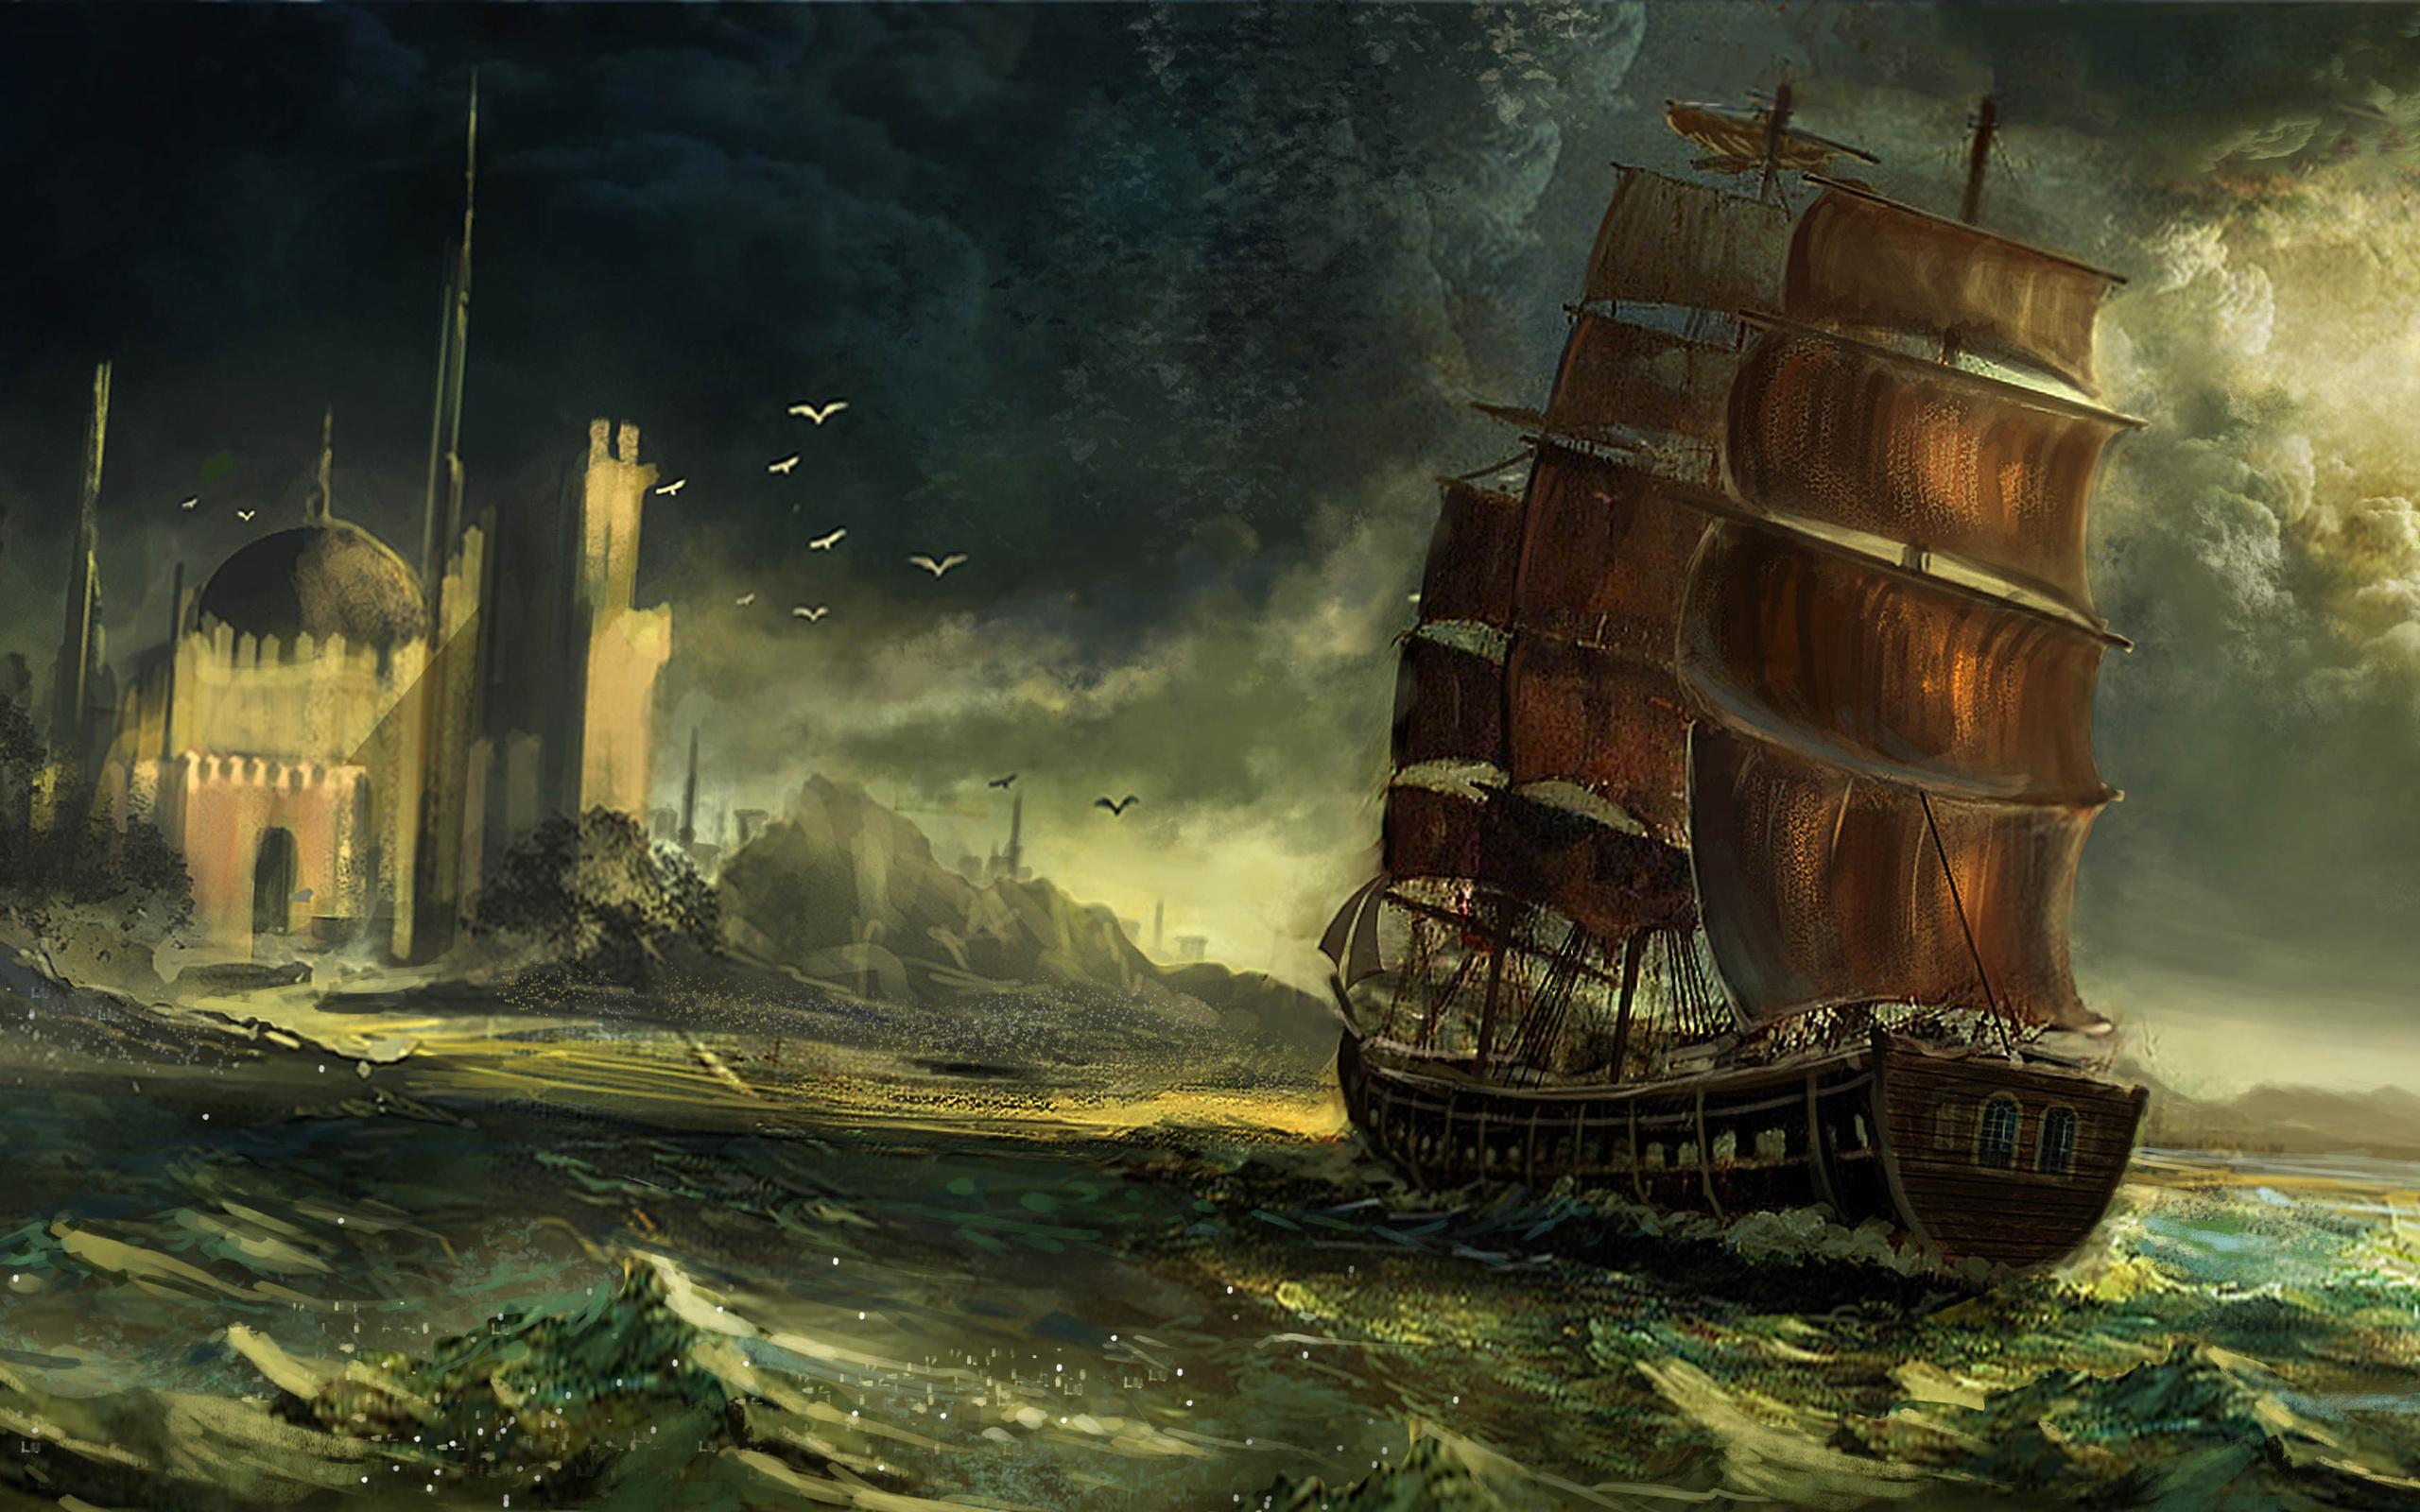 Pirate ship in the strom Wallpaper HD / Desktop and Mobile